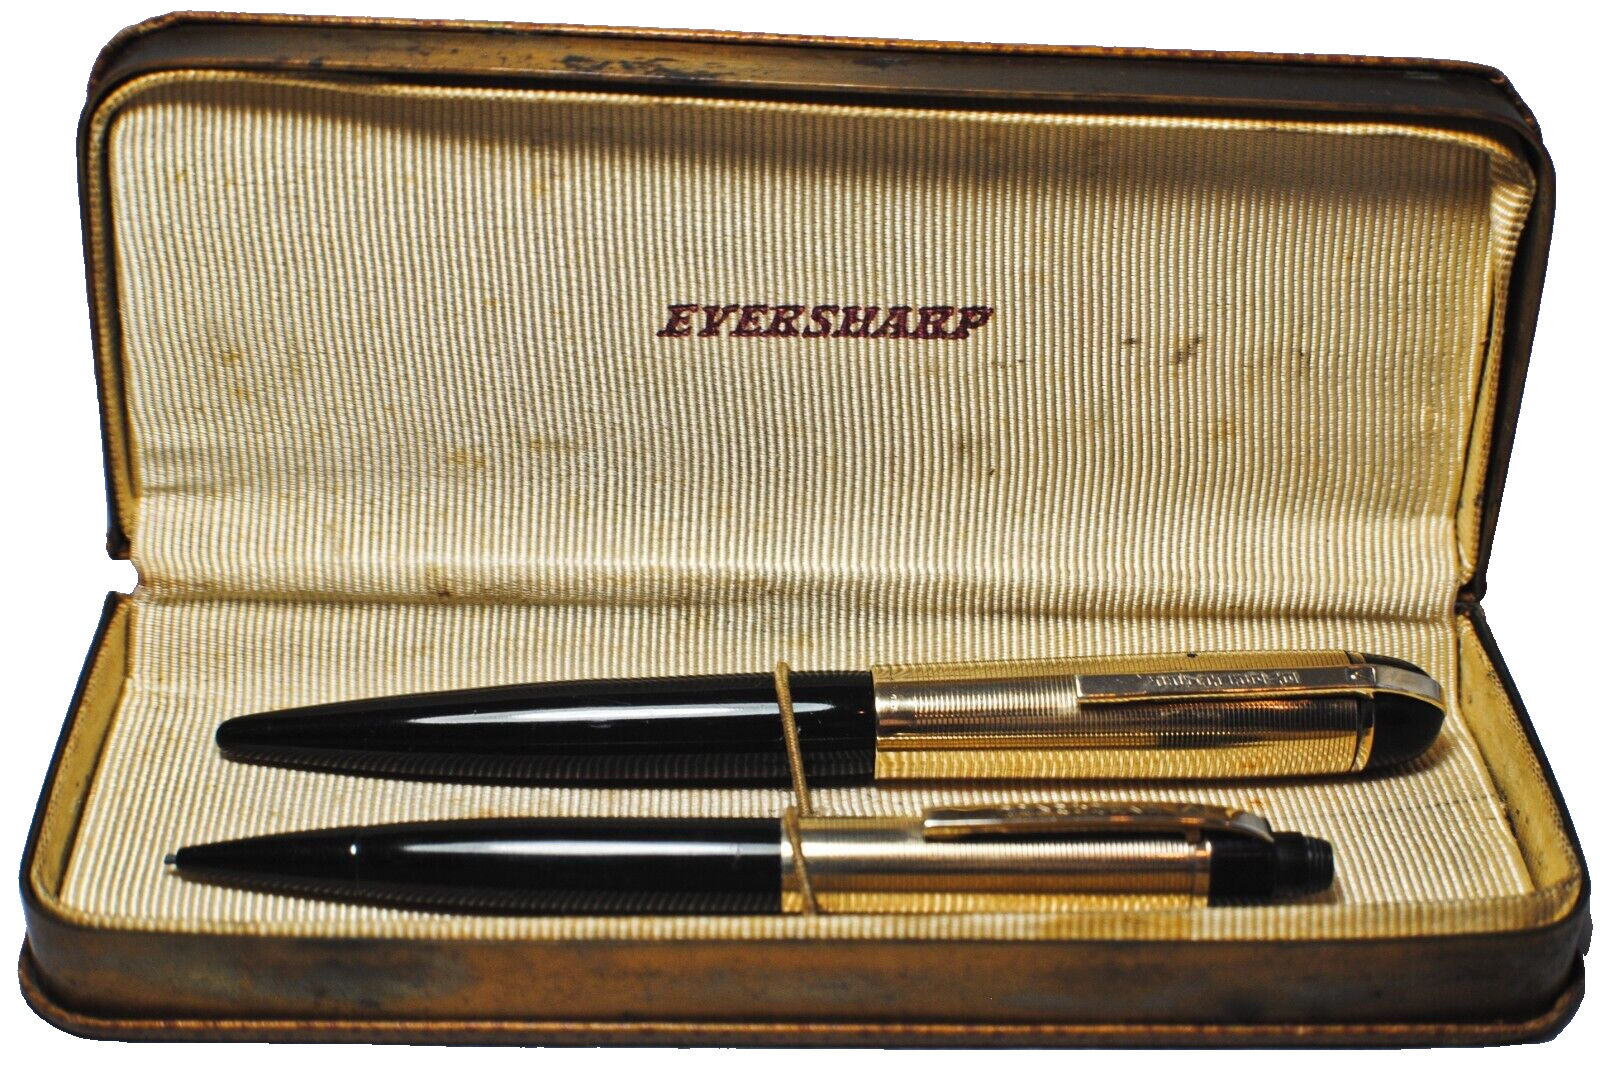 Beautifully Restored 1940's DECO style set of Skyline pen/pencil in sales box